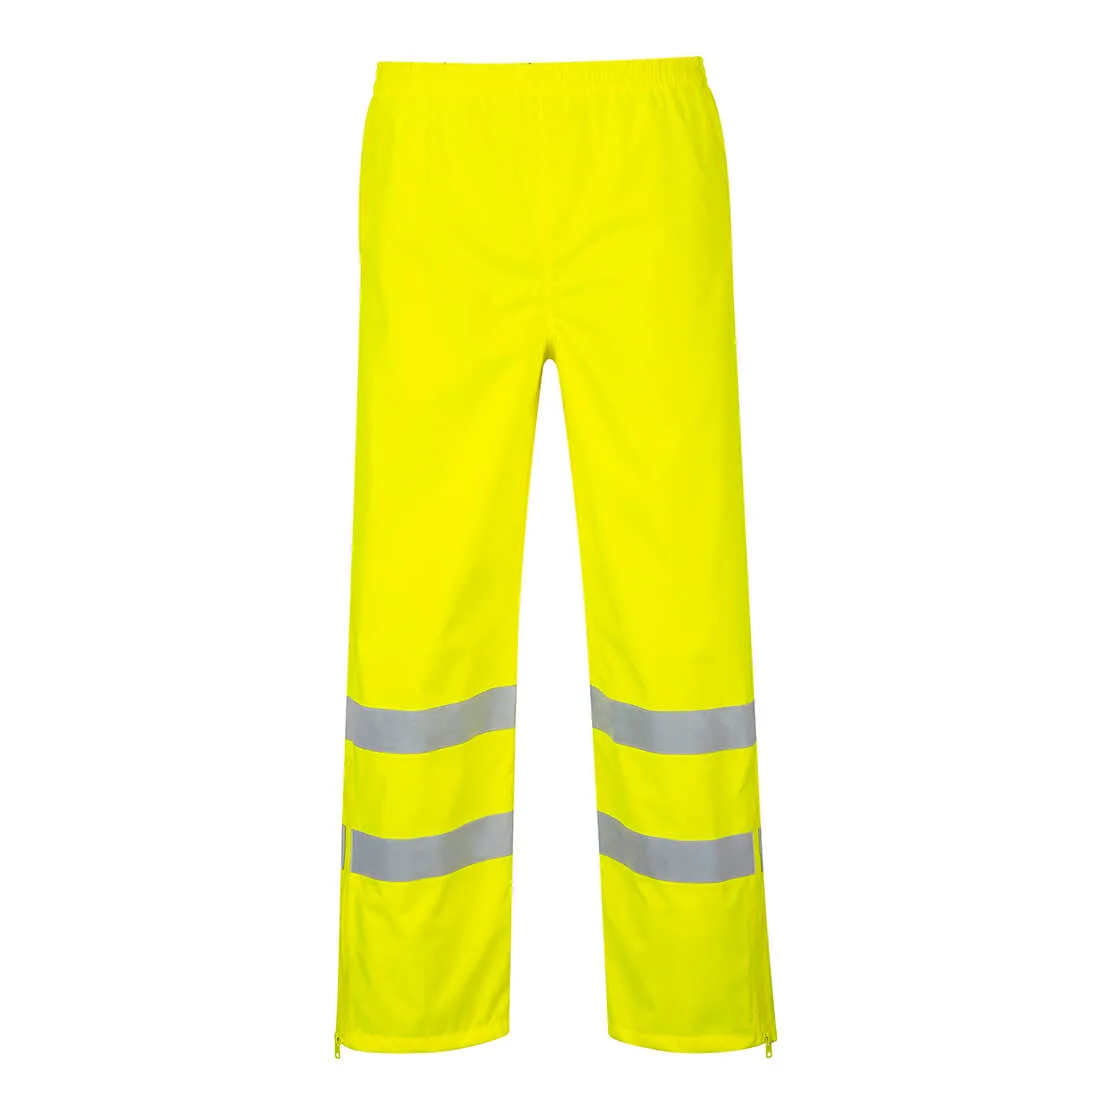 Oxford Weave 300D Class 1 Breathable Hi Vis Breathable Trousers - Yellow, 3XL